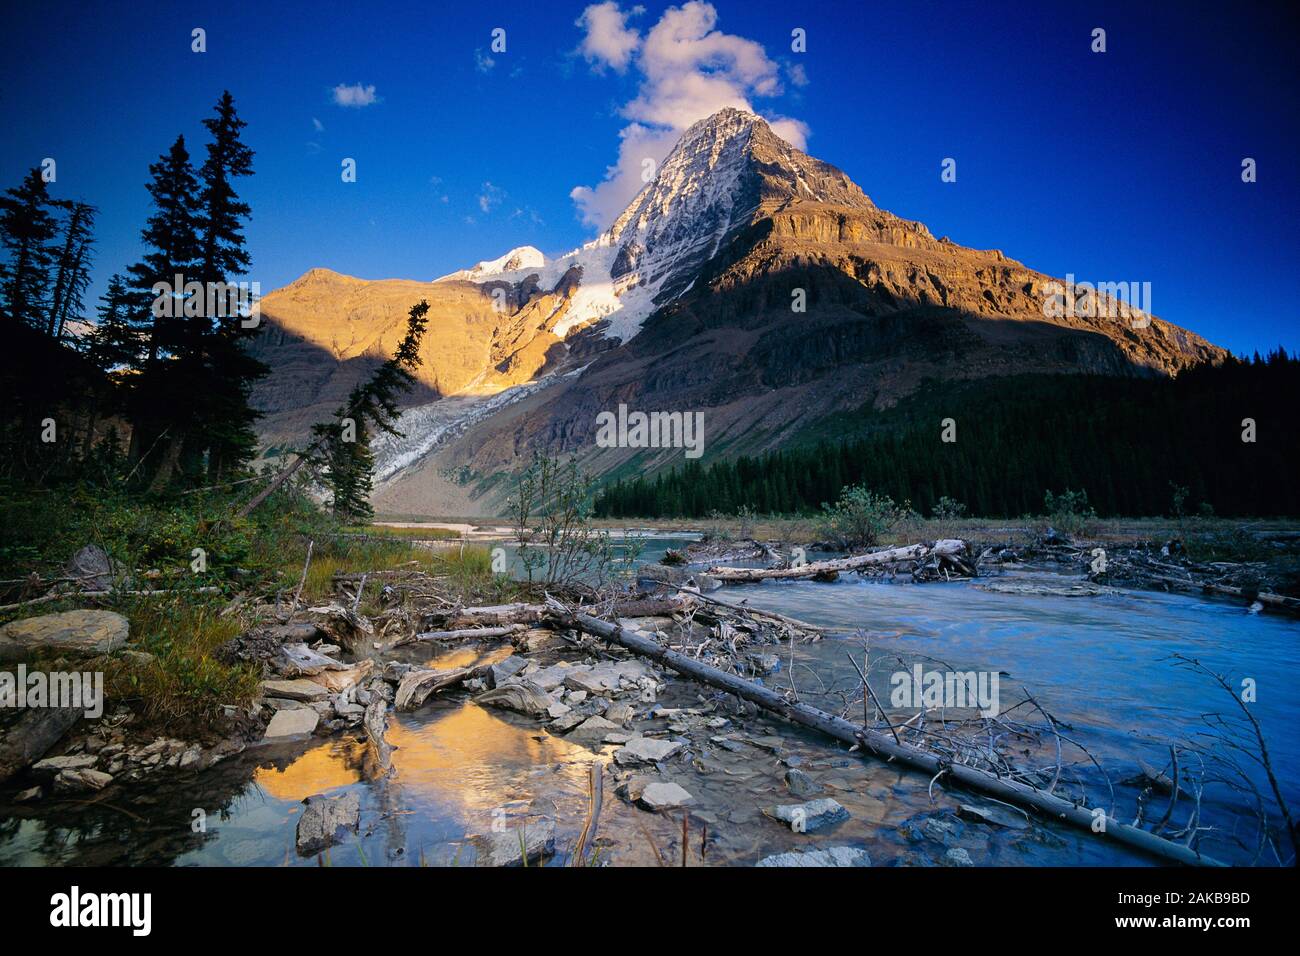 Landscape with mountain peak, Mount Robson Provincial Park, British Columbia, Canada Stock Photo